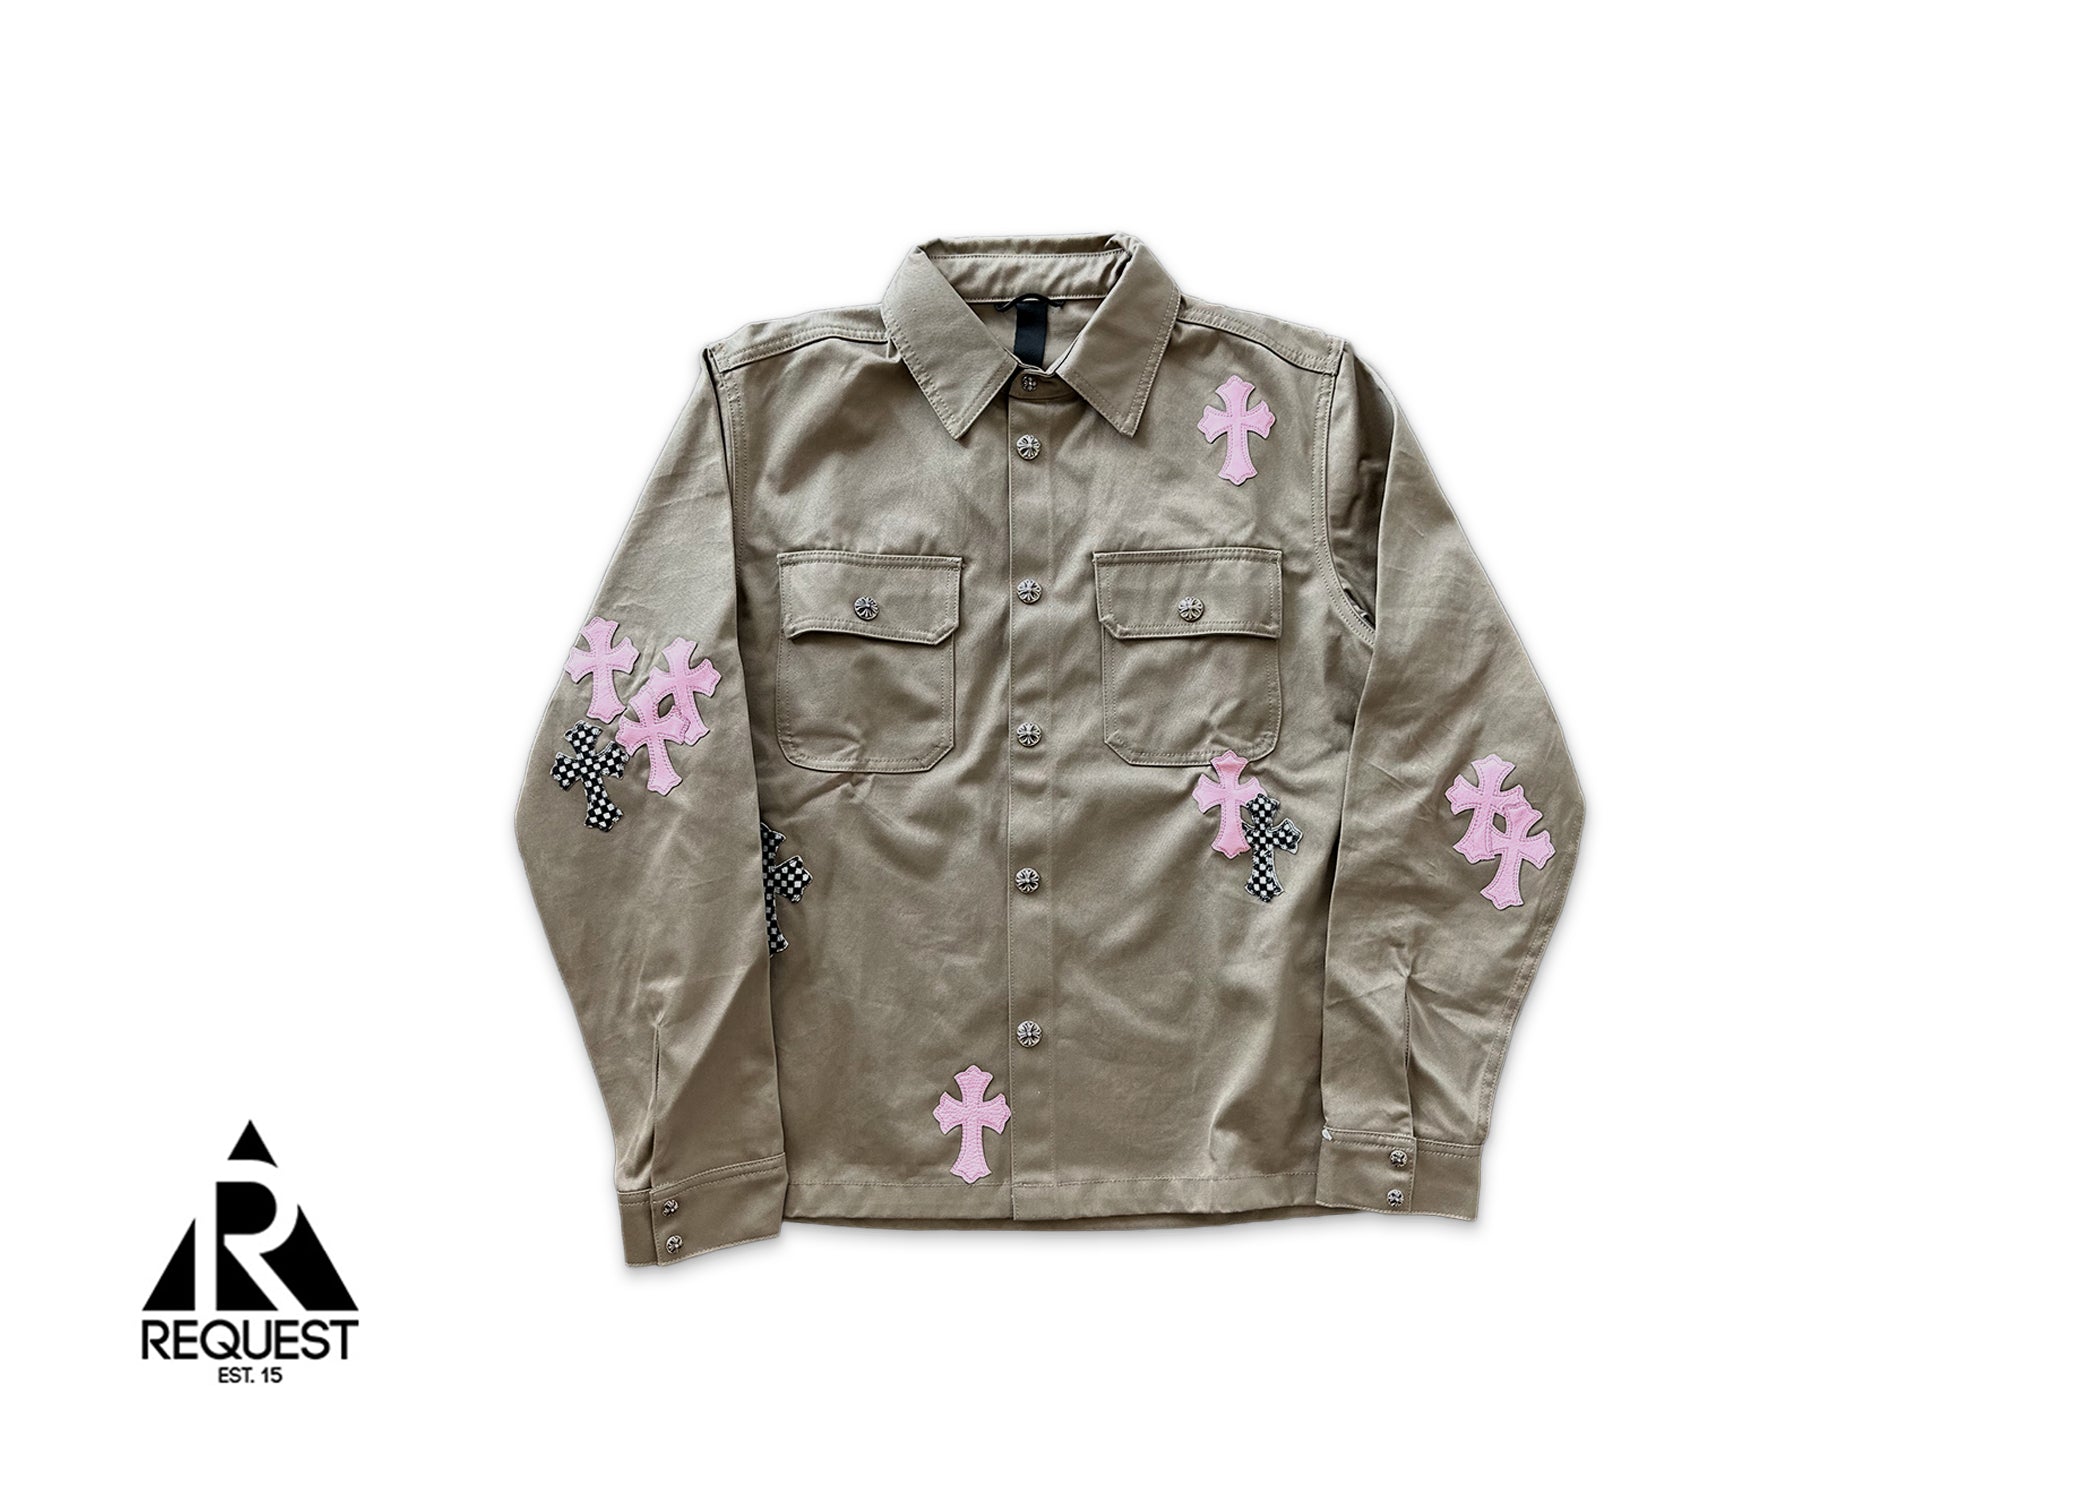 Chrome Hearts Work Dog Jacket "Pink & Checkered Crosses"